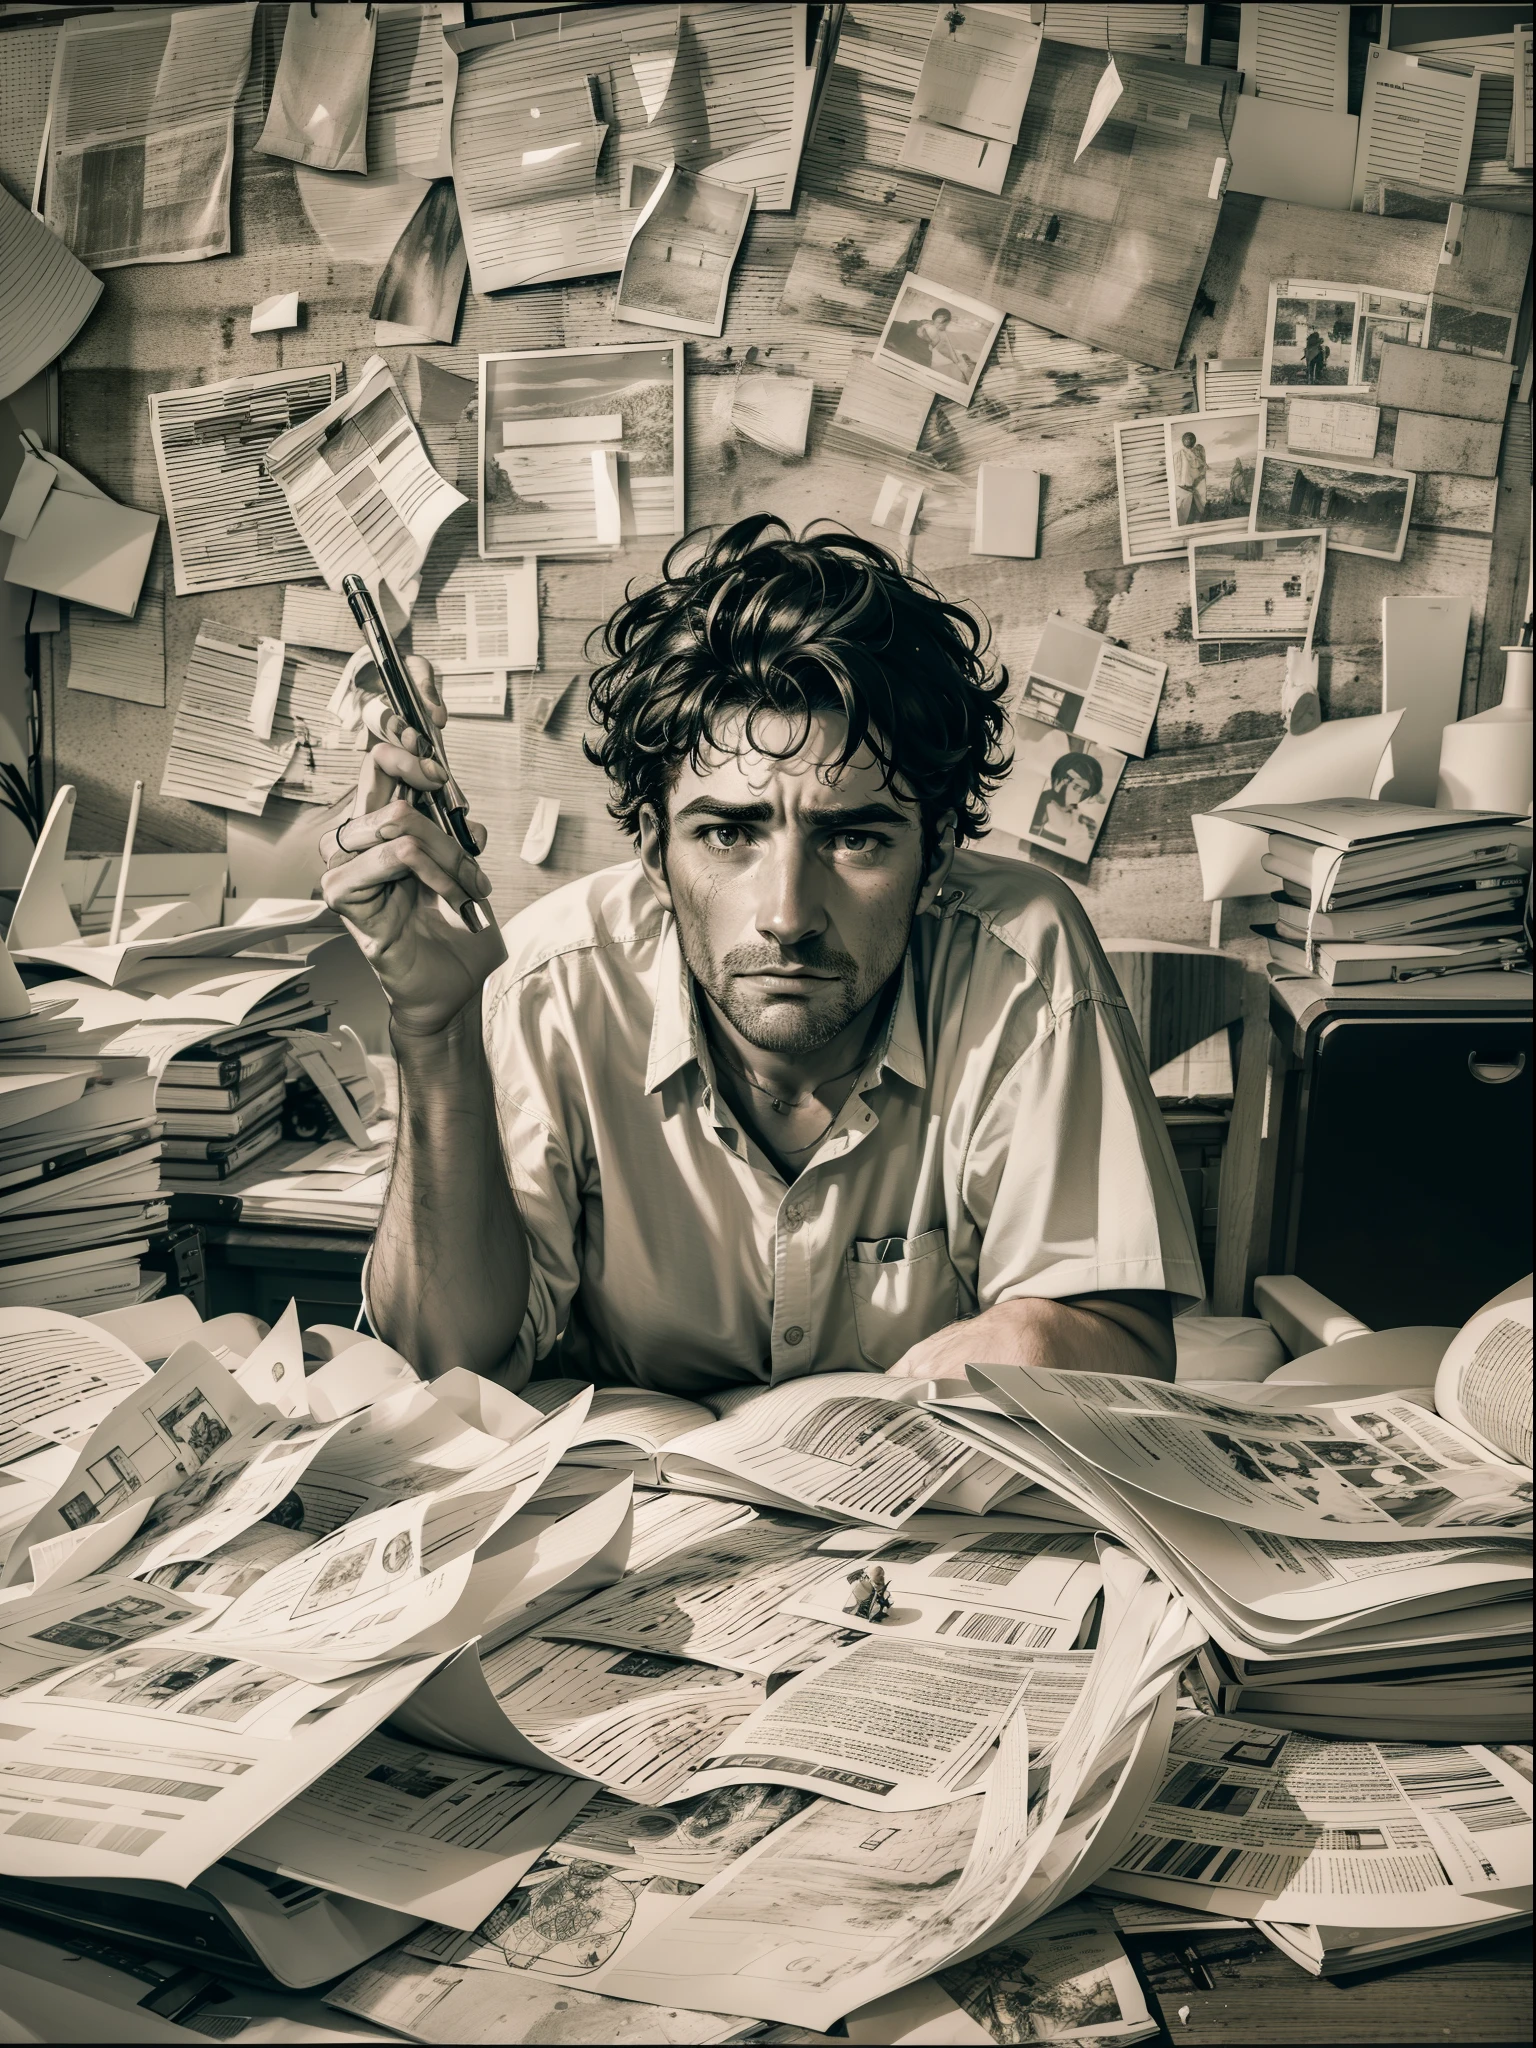 to a person standing in an office room, with a pile of disorganized papers scattered around it. The person has messy and messy hair, com alguns fios caindo sobre o rosto. His shoulders are hunched and tense, and there are wrinkles of worry and stress on your forehead. Seu rosto parece cansado e abatido, com olheiras profundas sob os olhos. They're holding a pen in their hand, but seem unable to get to work or sort out what's in front of them. There's an expression of frustration and helplessness on his face, as they stare at the papers in front of them. The image conveys the feeling of overload and pressure that work is causing that person.